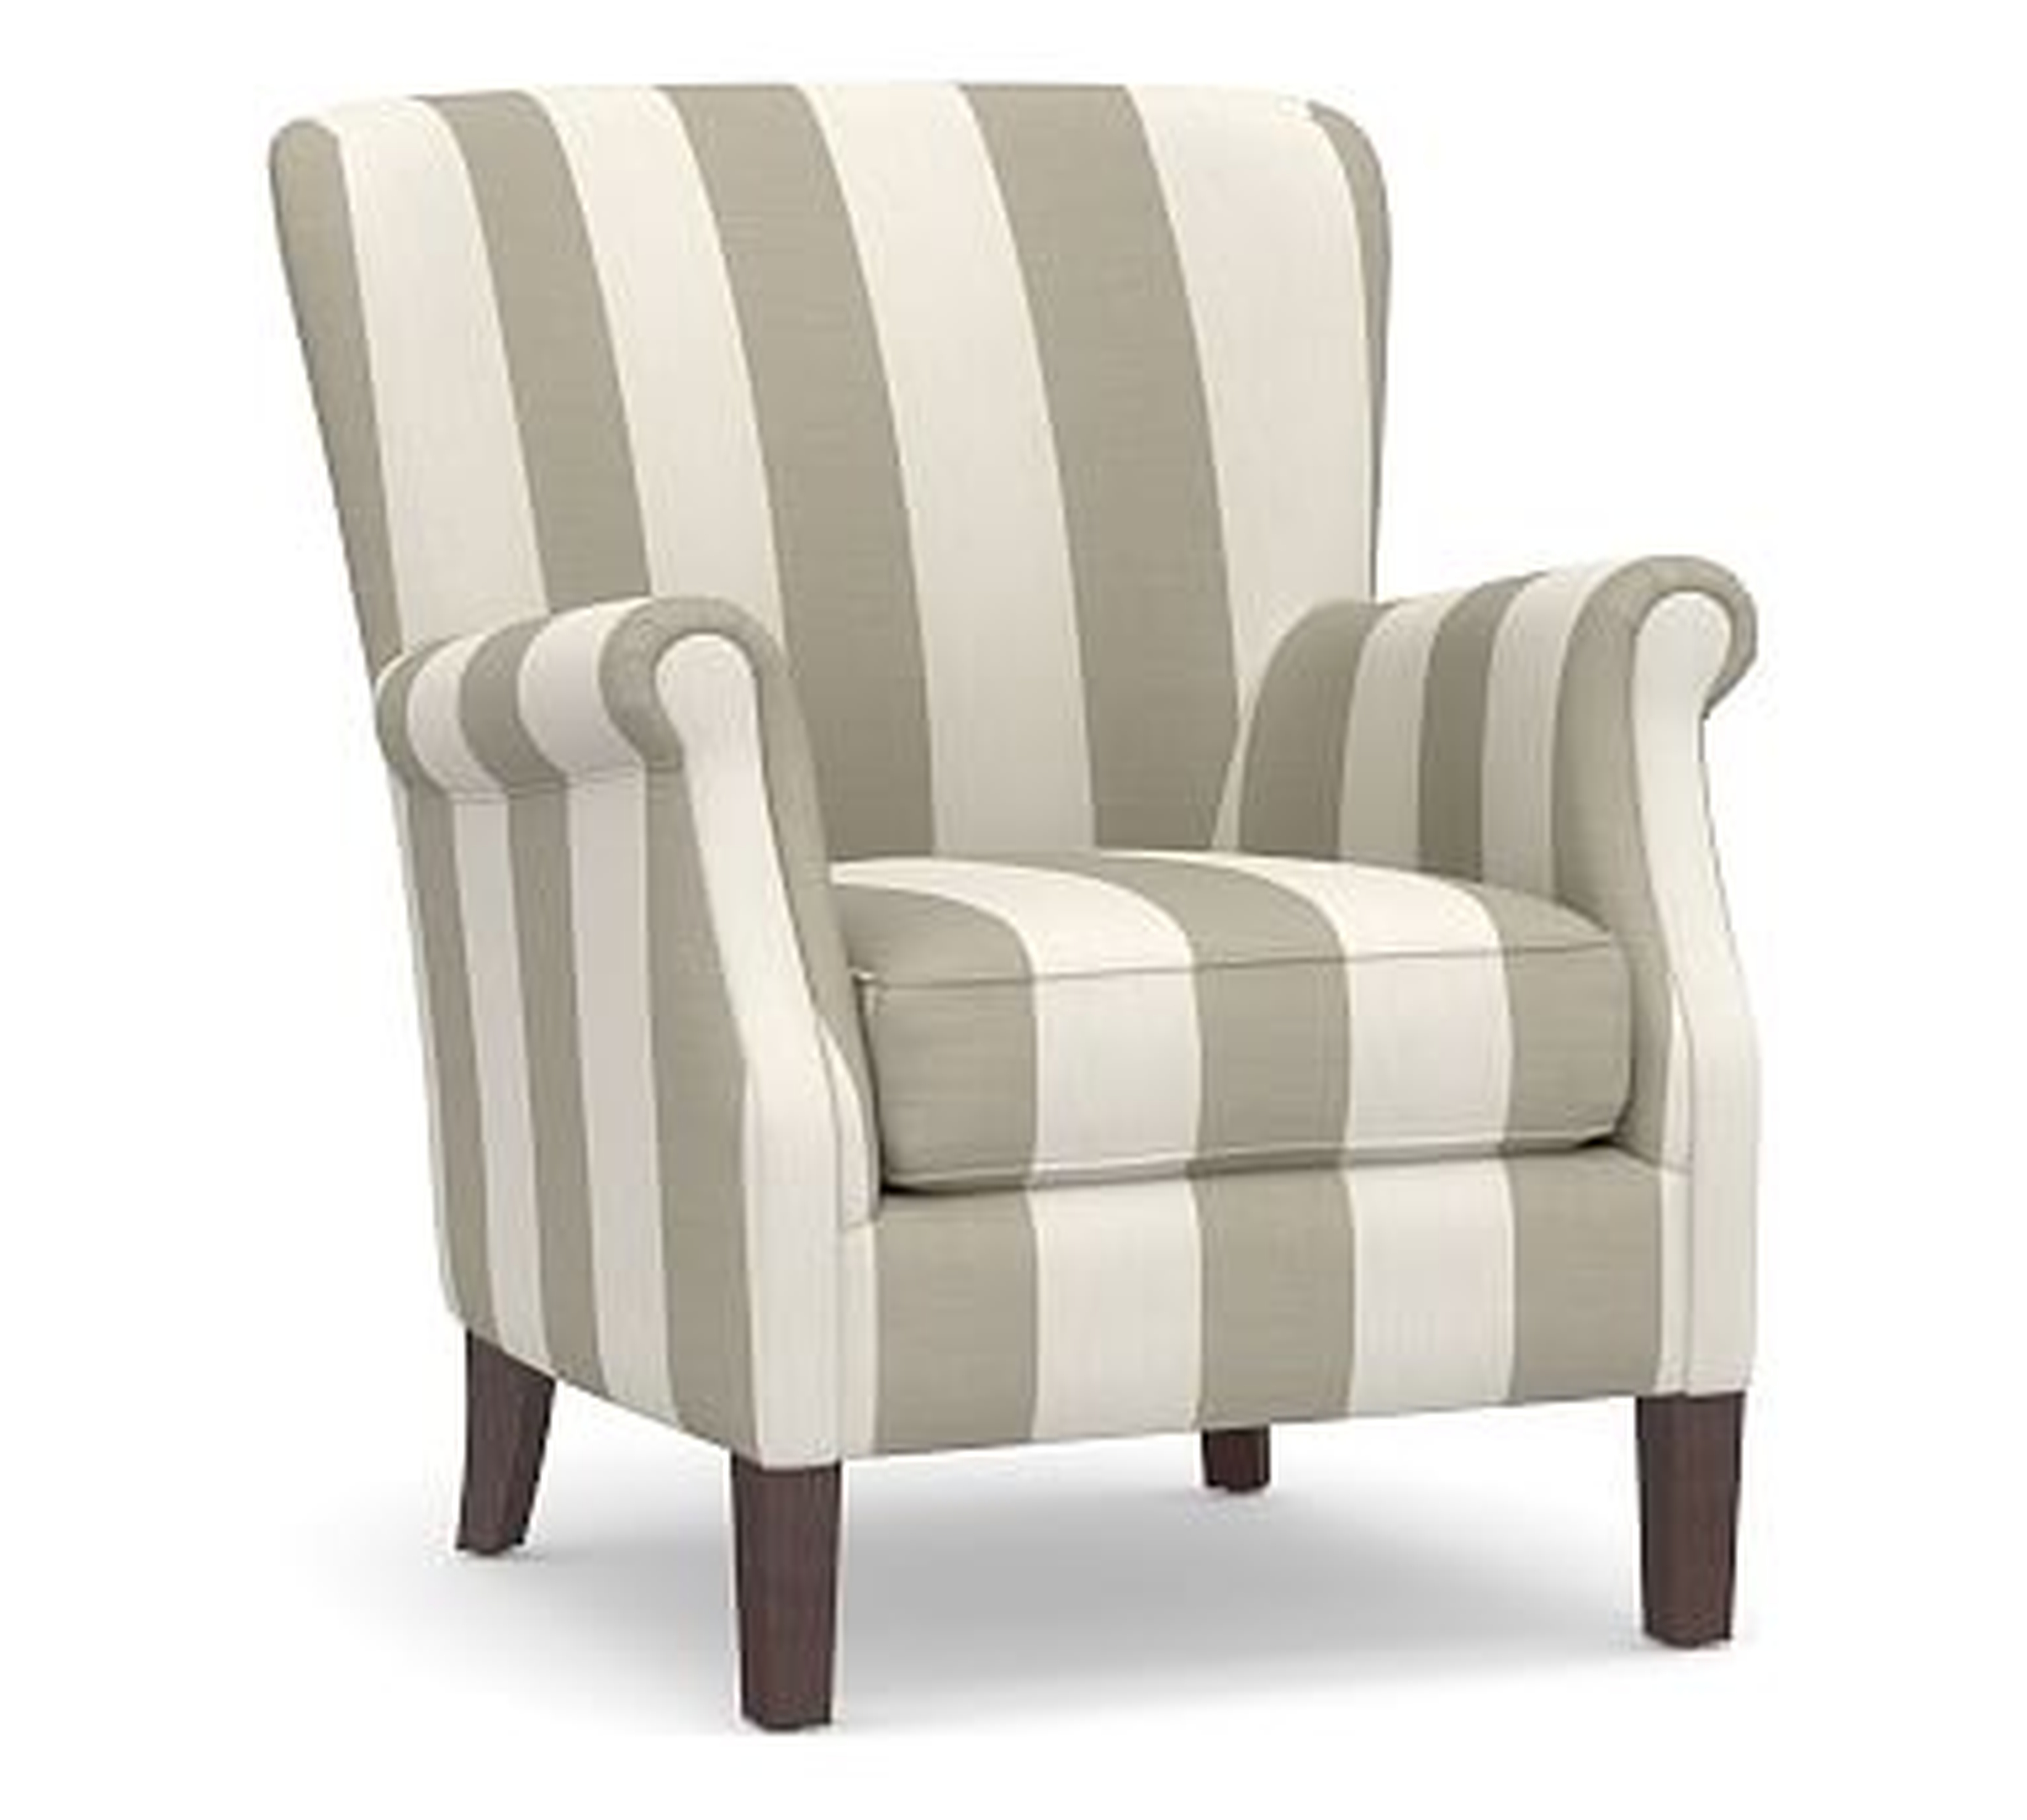 SoMa Minna Upholstered Armchair, Polyester Wrapped Cushions, Premium Performance Awning Stripe Oatmeal/Ivory - Pottery Barn